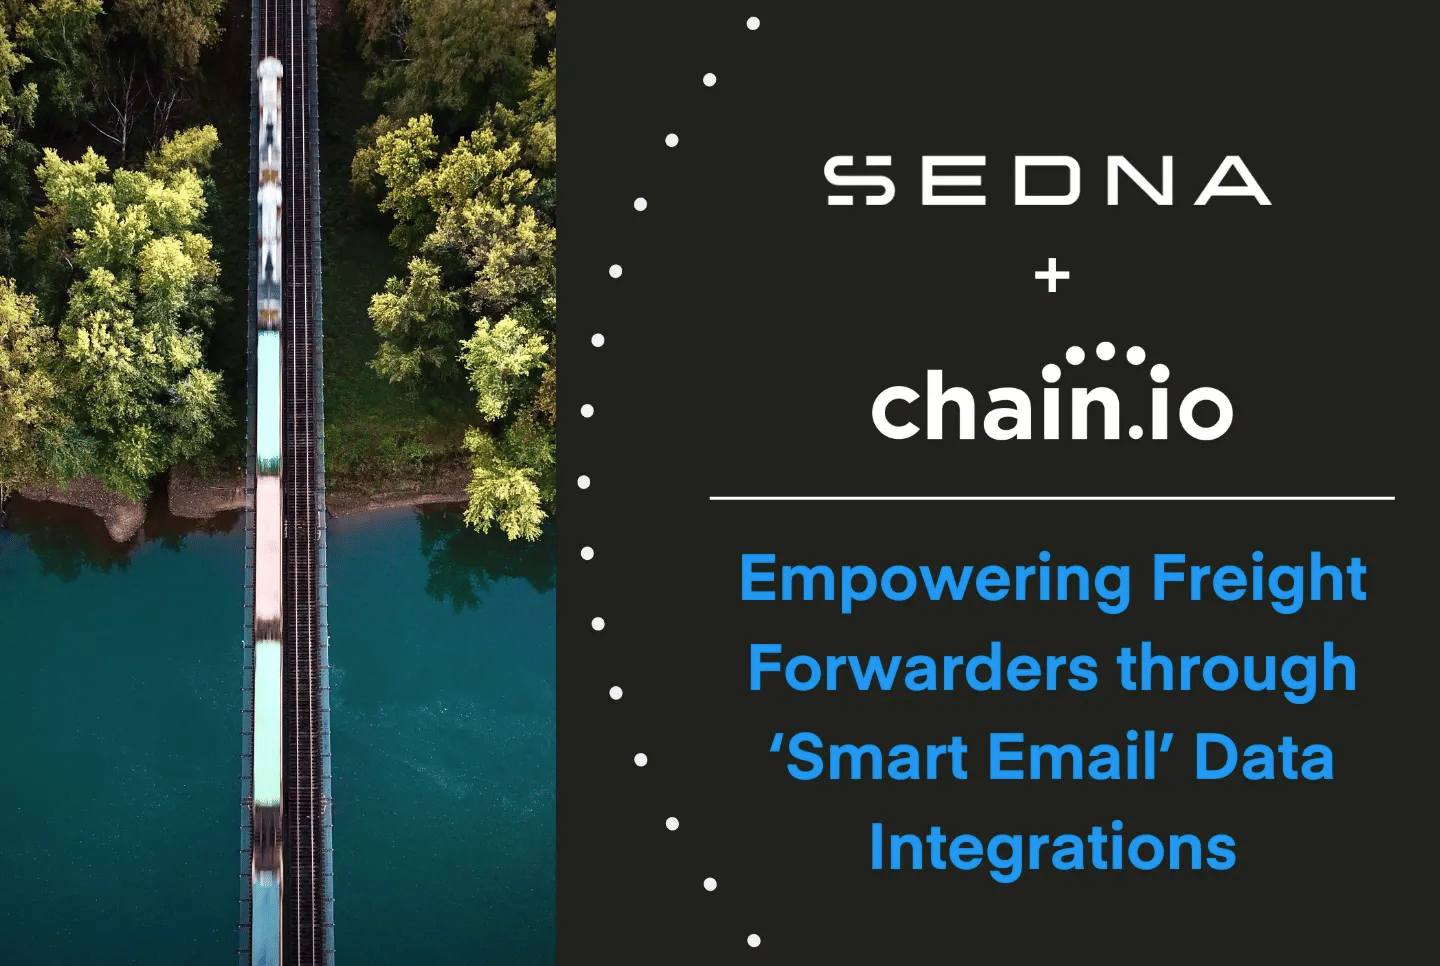 The integration of SEDNA into our network of partners will expand freight forwarders’ communication, document management, and business intelligence capabilities